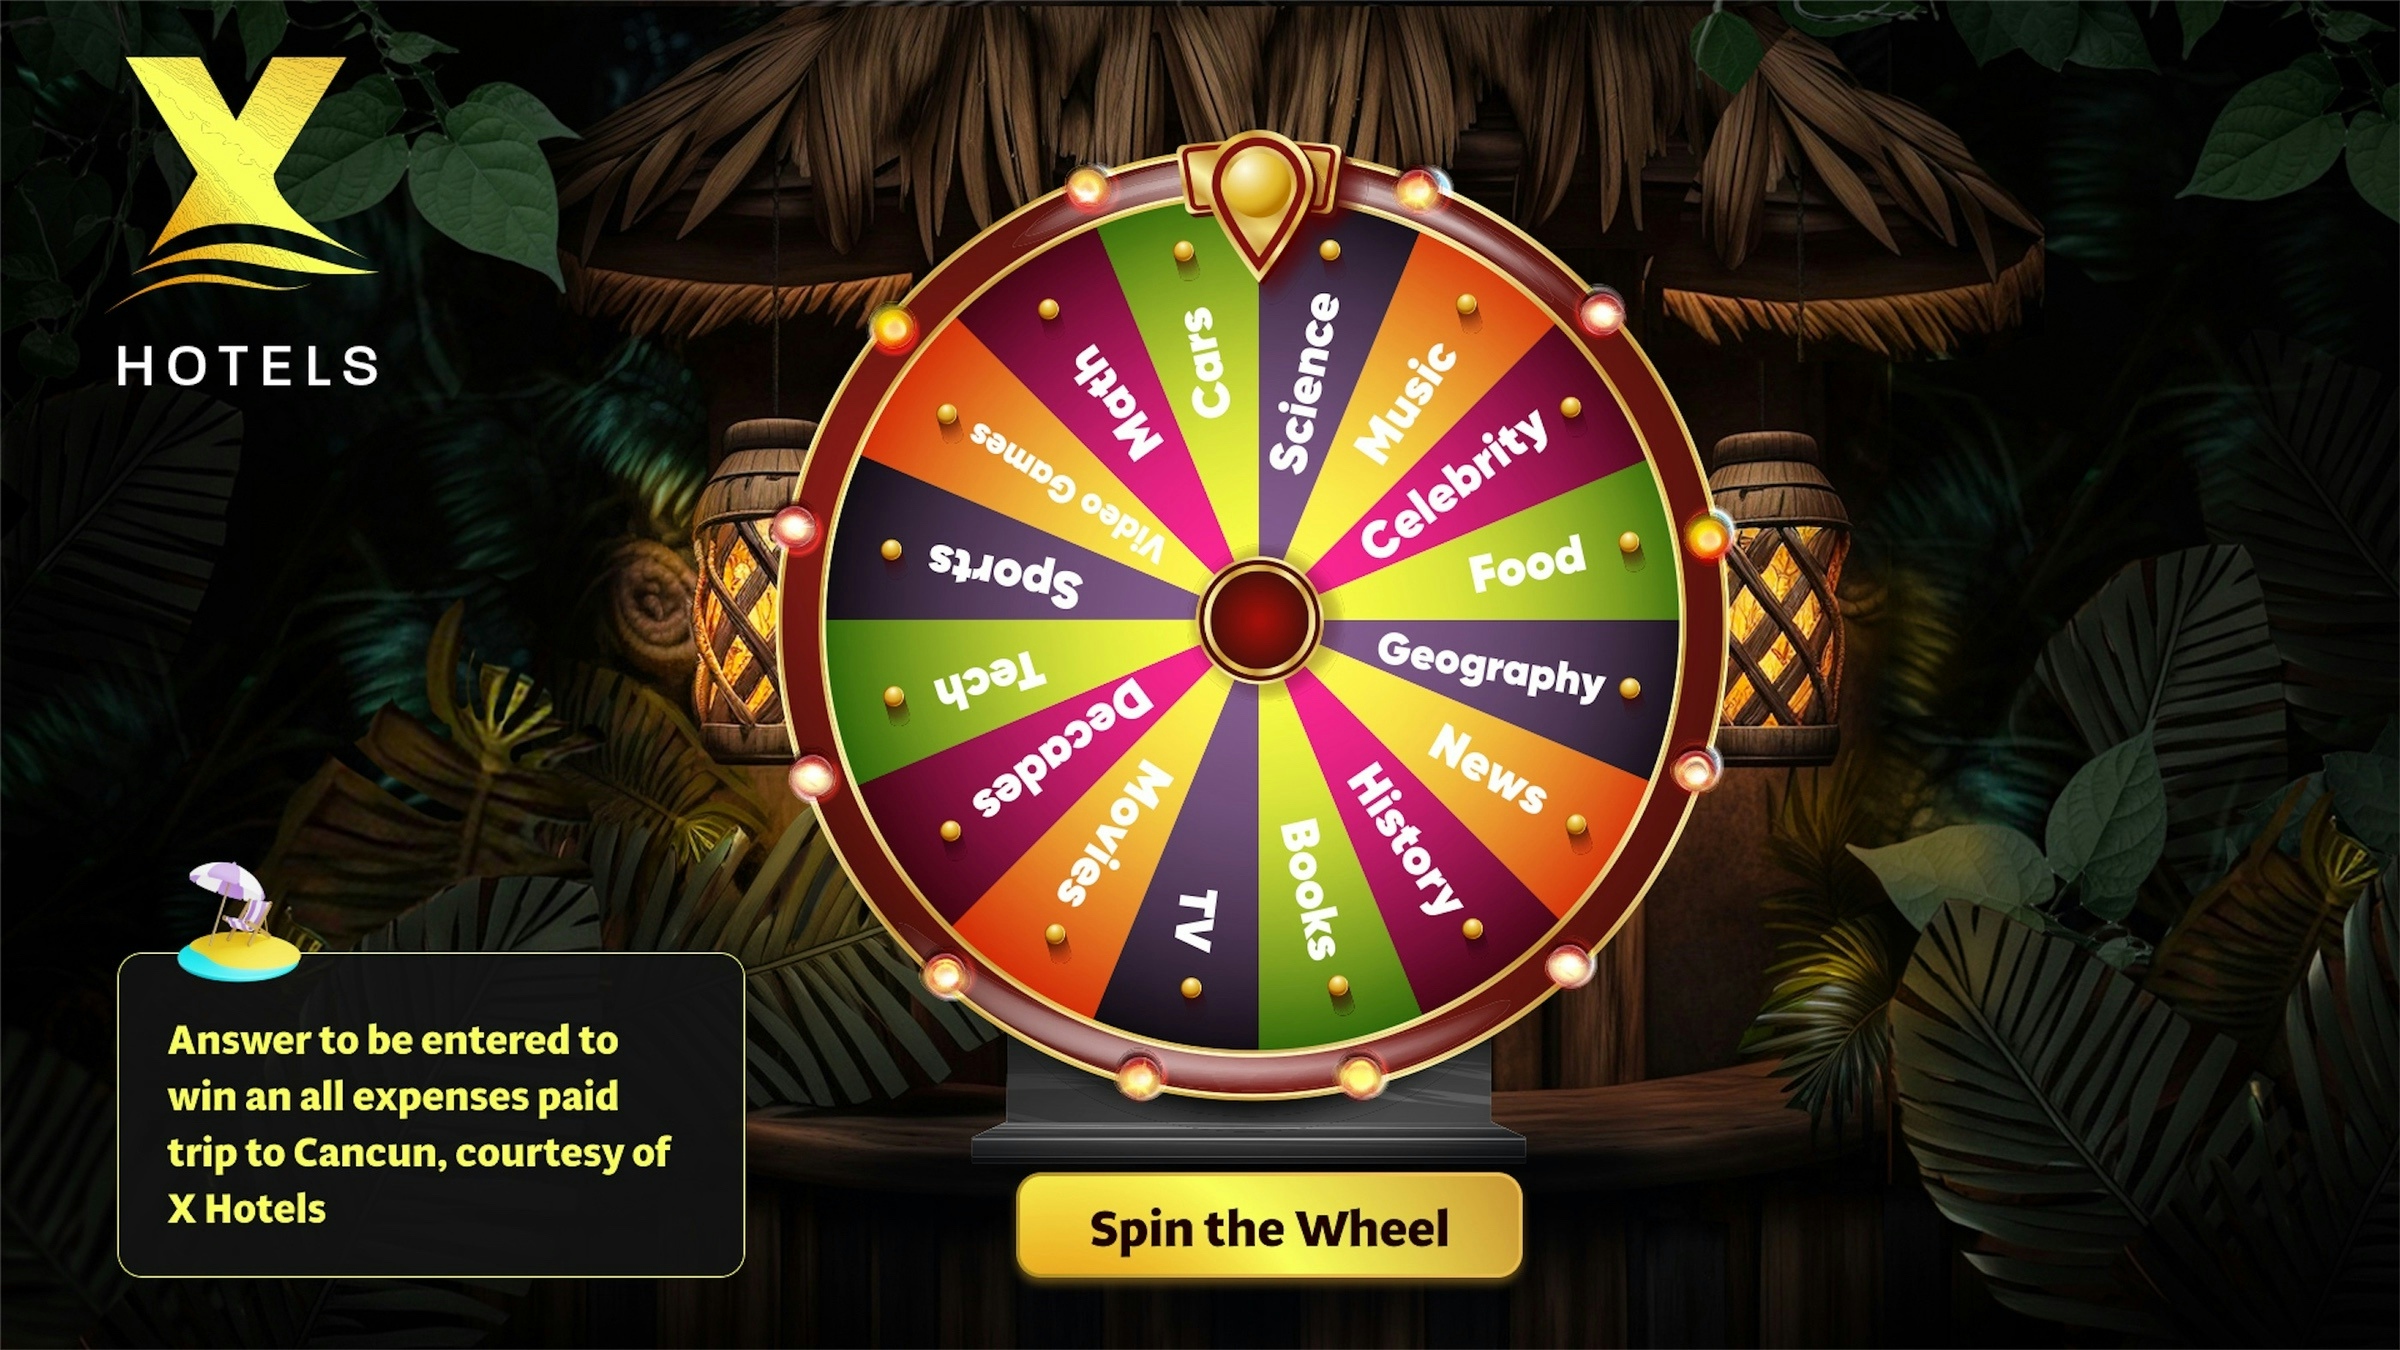 Trust lady luck with this spin-the-wheel activation